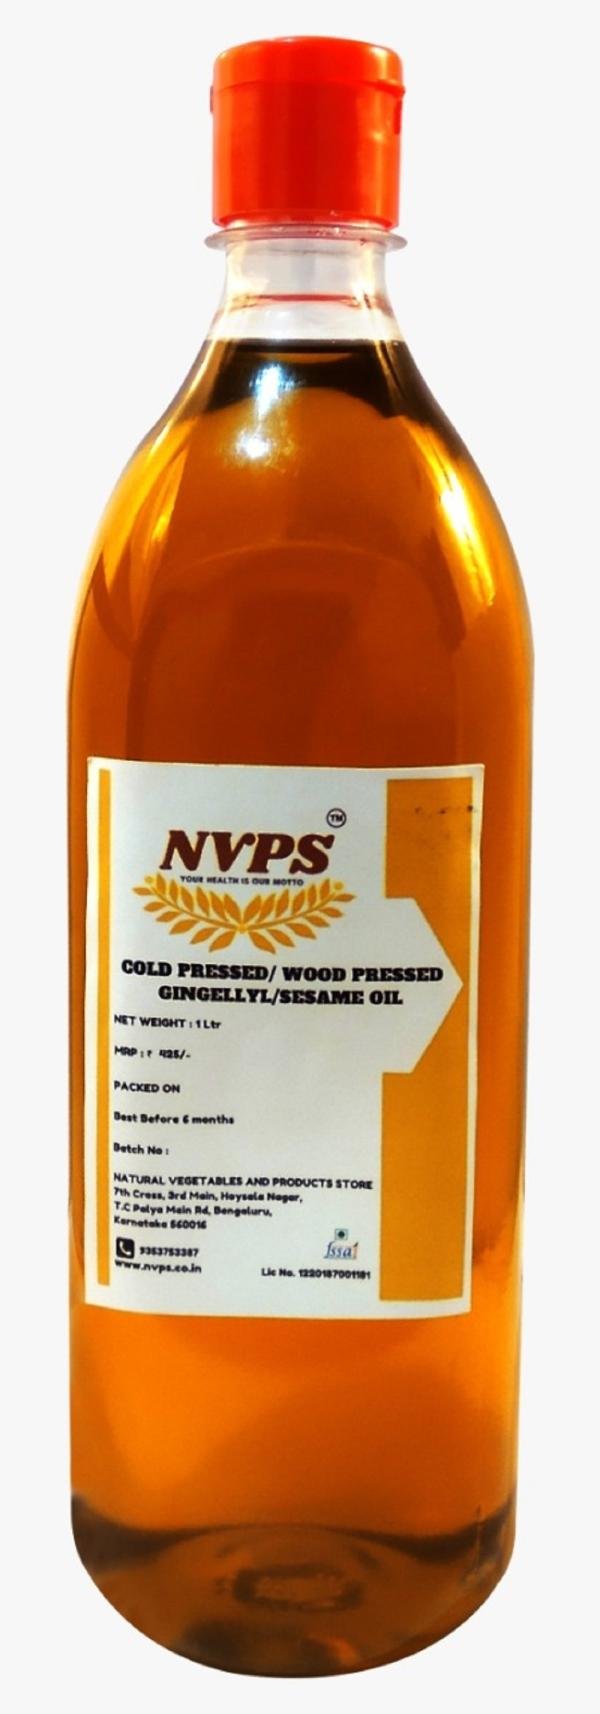 nvps cold pressed gingelly oil wood pressed sesame oil 1 ltr product images orvy5ygermn p591295172 0 202205132049